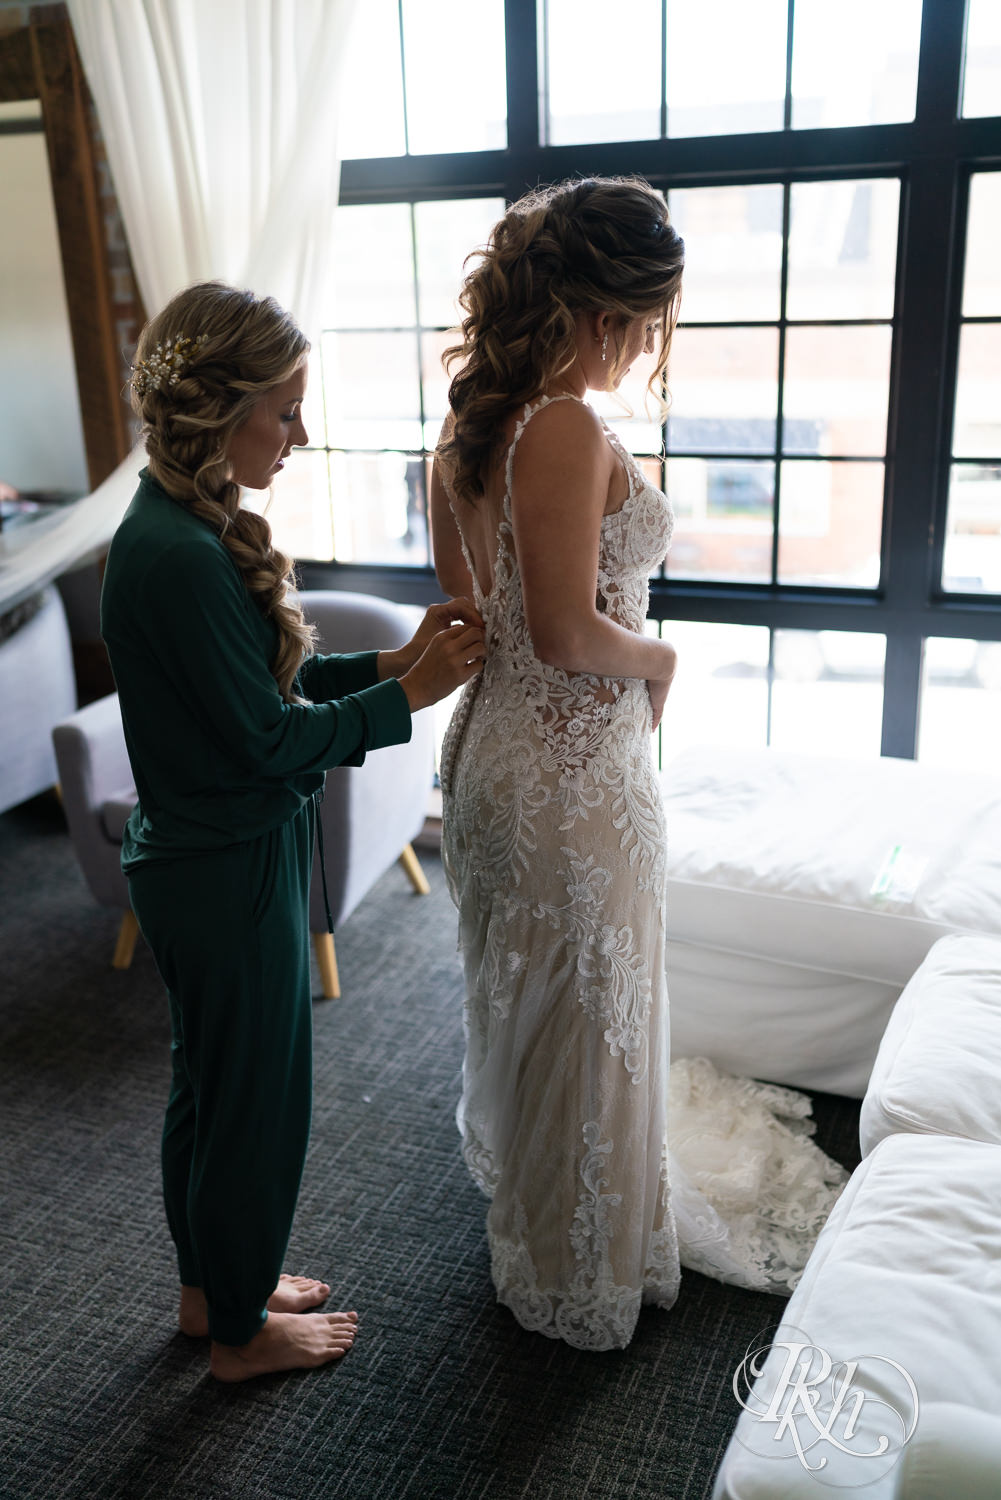 Bride getting buttoned into dress at Hotel Crosby in Stillwater, Minnesota.